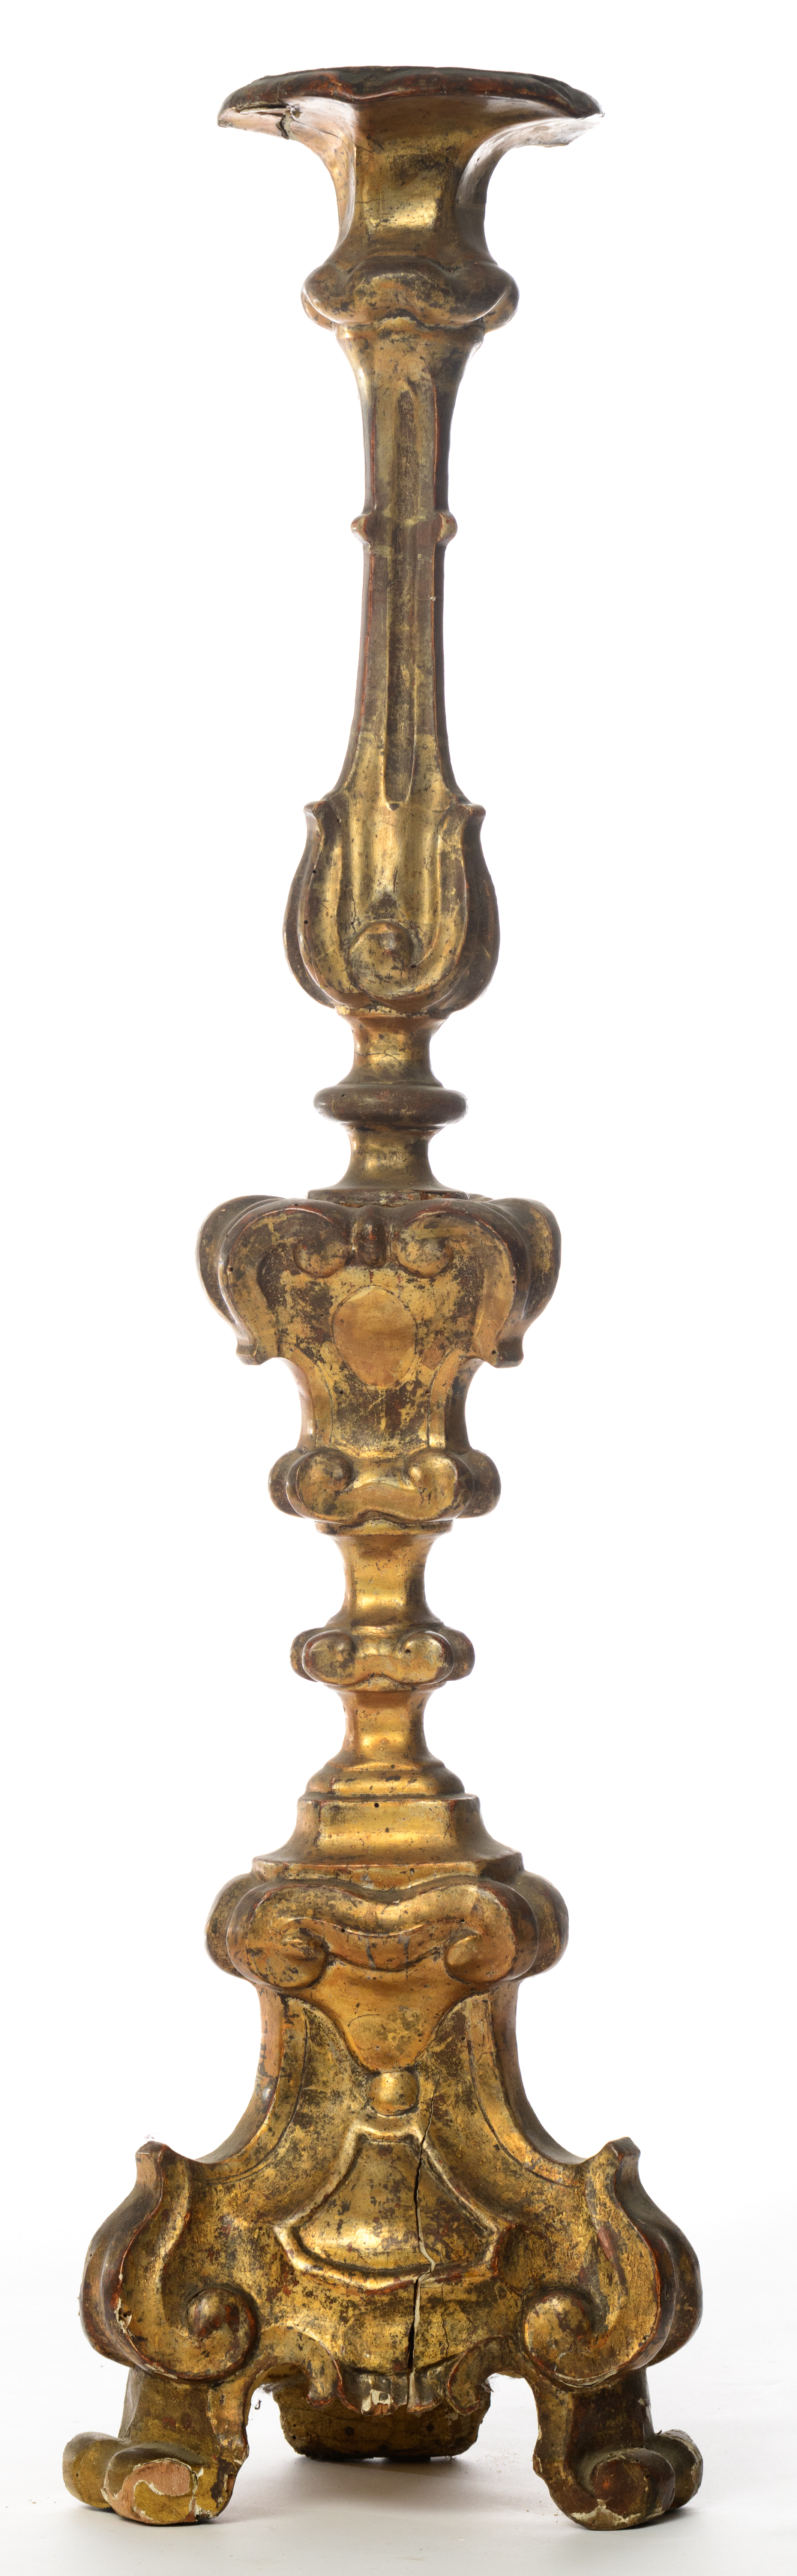 A large gilded wood Baroque altar candlestick, 18thC, H 118 cm - Image 3 of 10